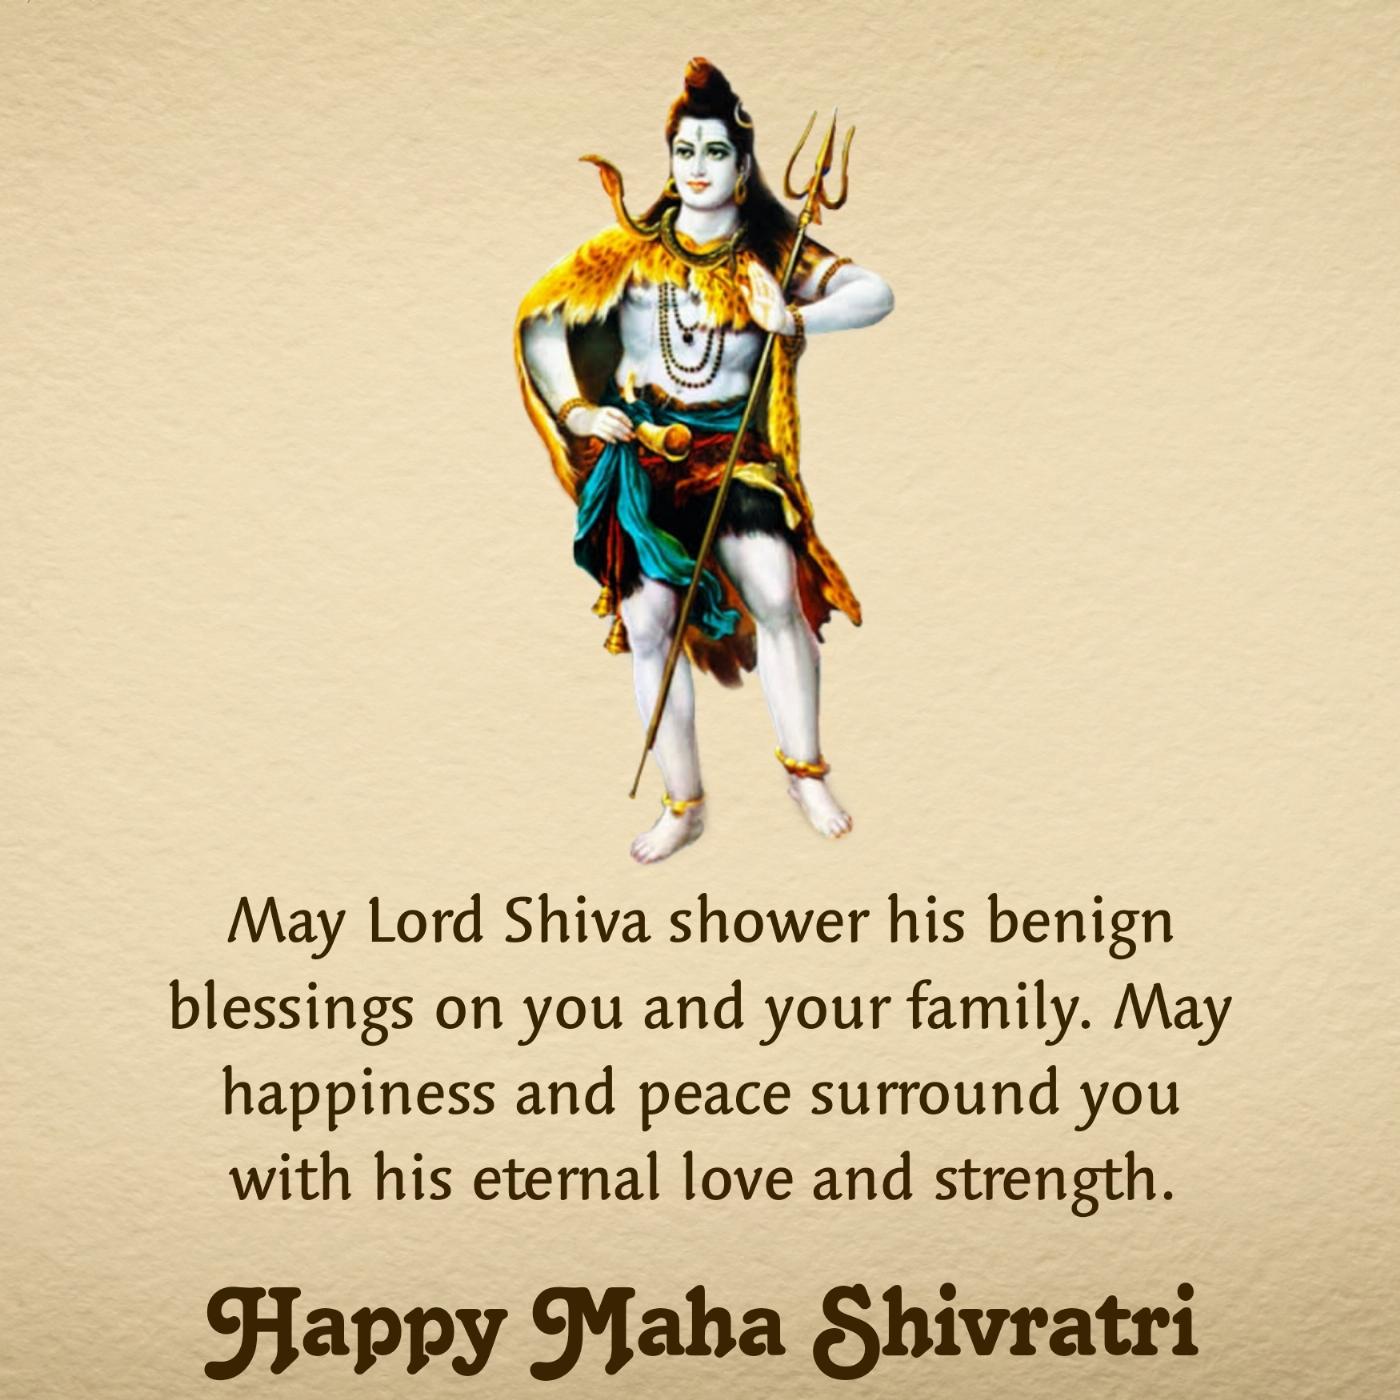 May Lord Shiva shower his benign blessings on you